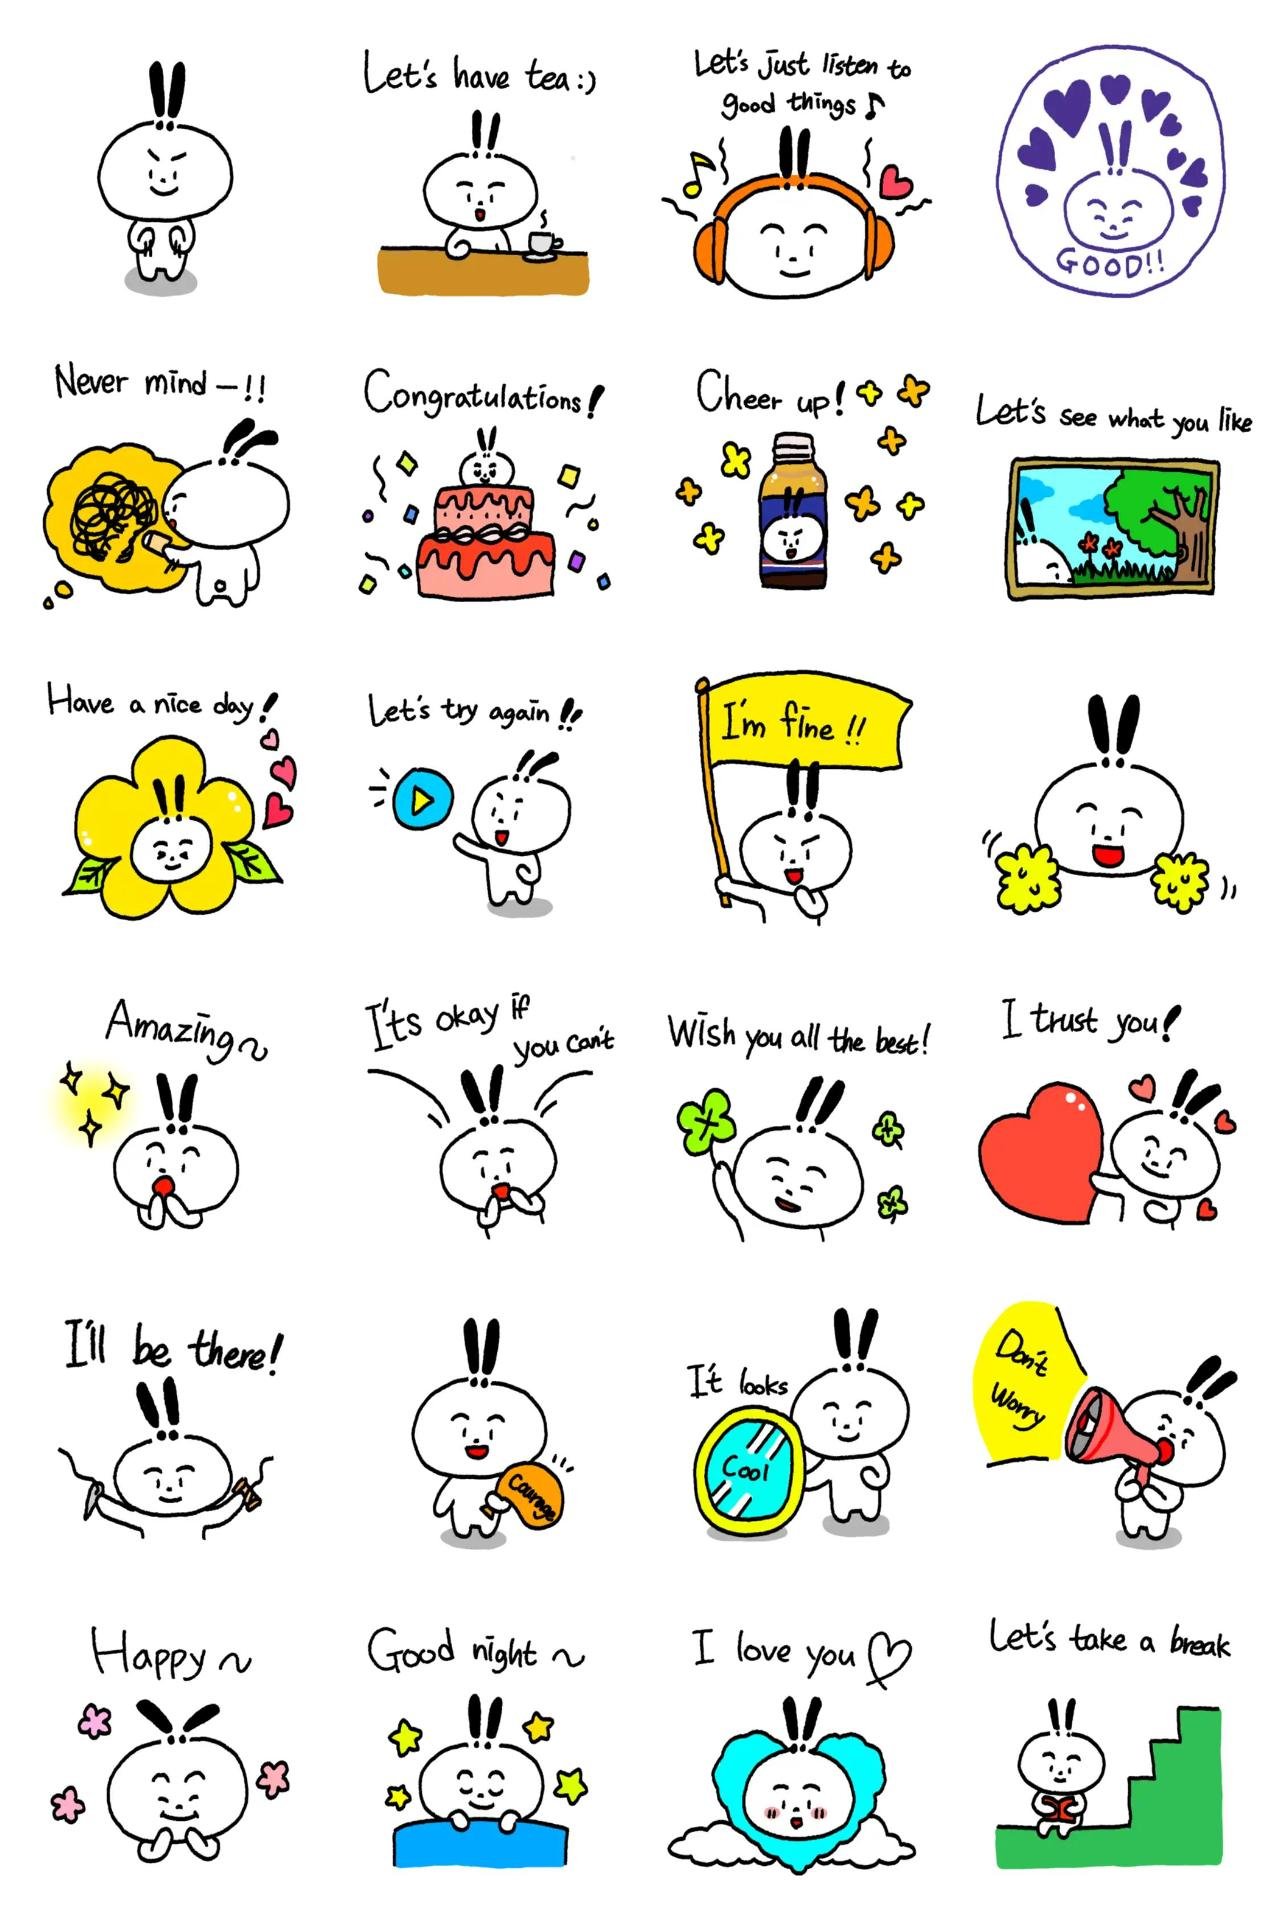 Exclamation mark rabbit Animals sticker pack for Whatsapp, Telegram, Signal, and others chatting and message apps